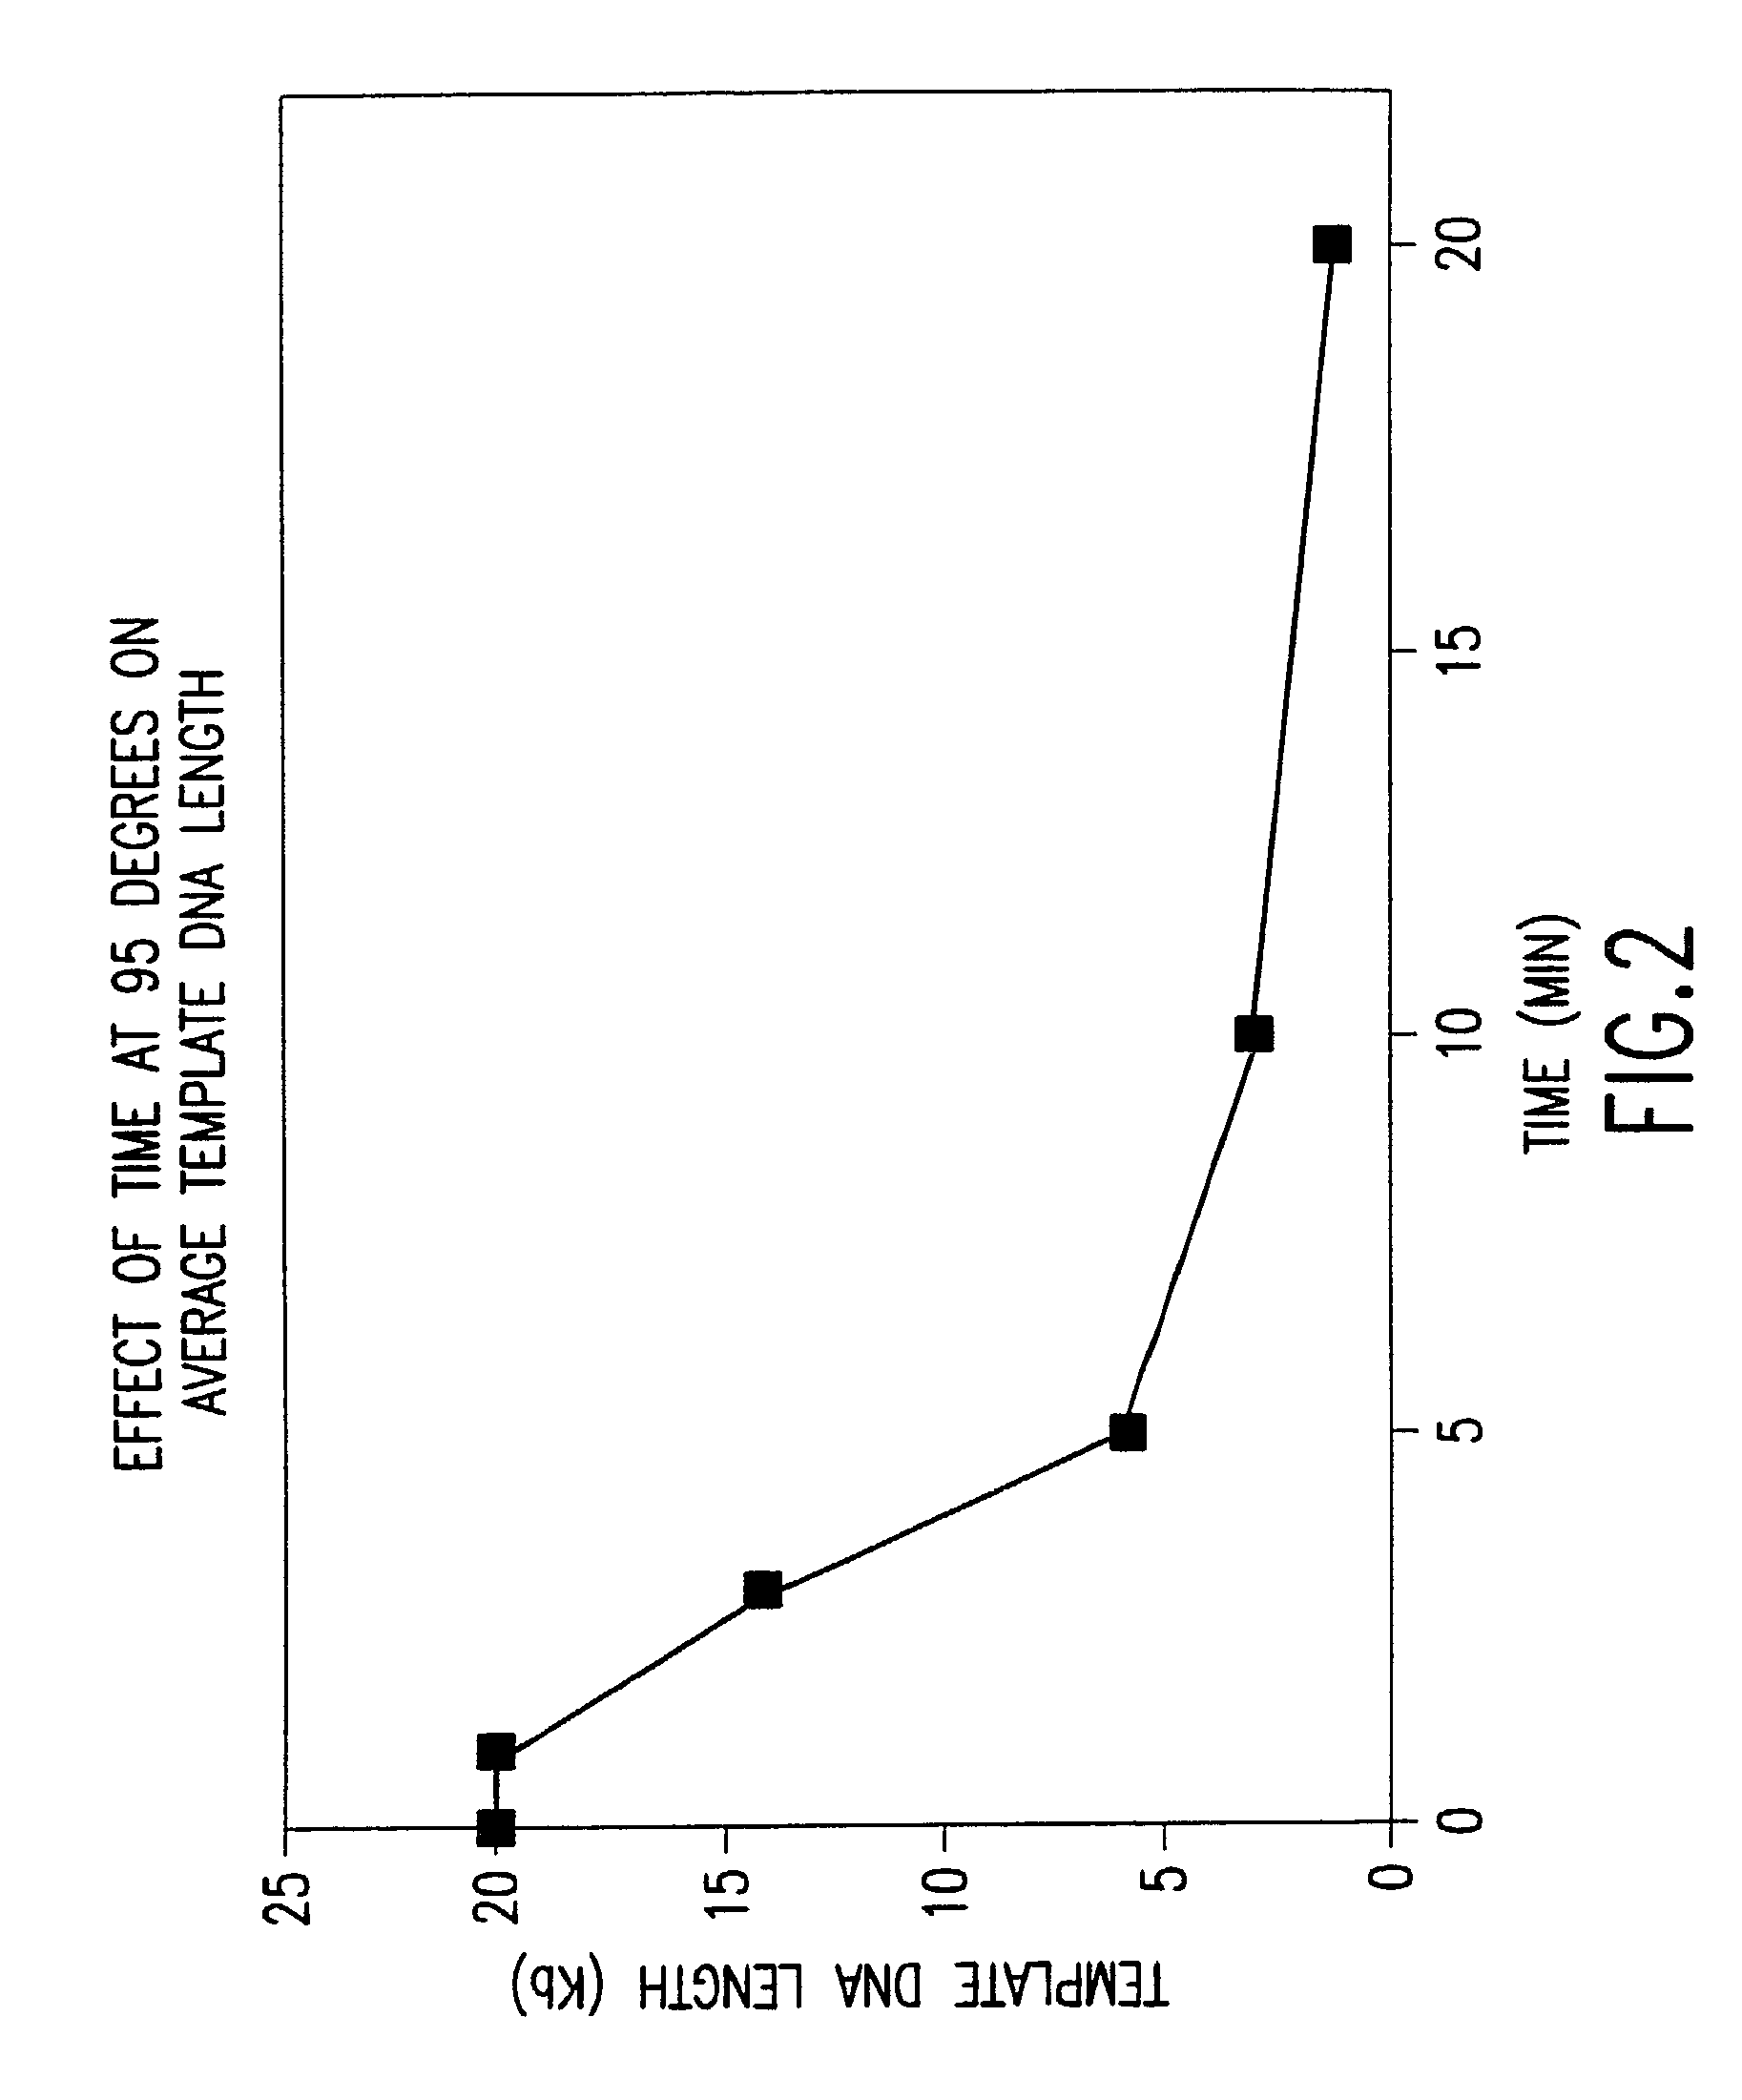 Method for nucleic acid amplification that results in low amplification bias